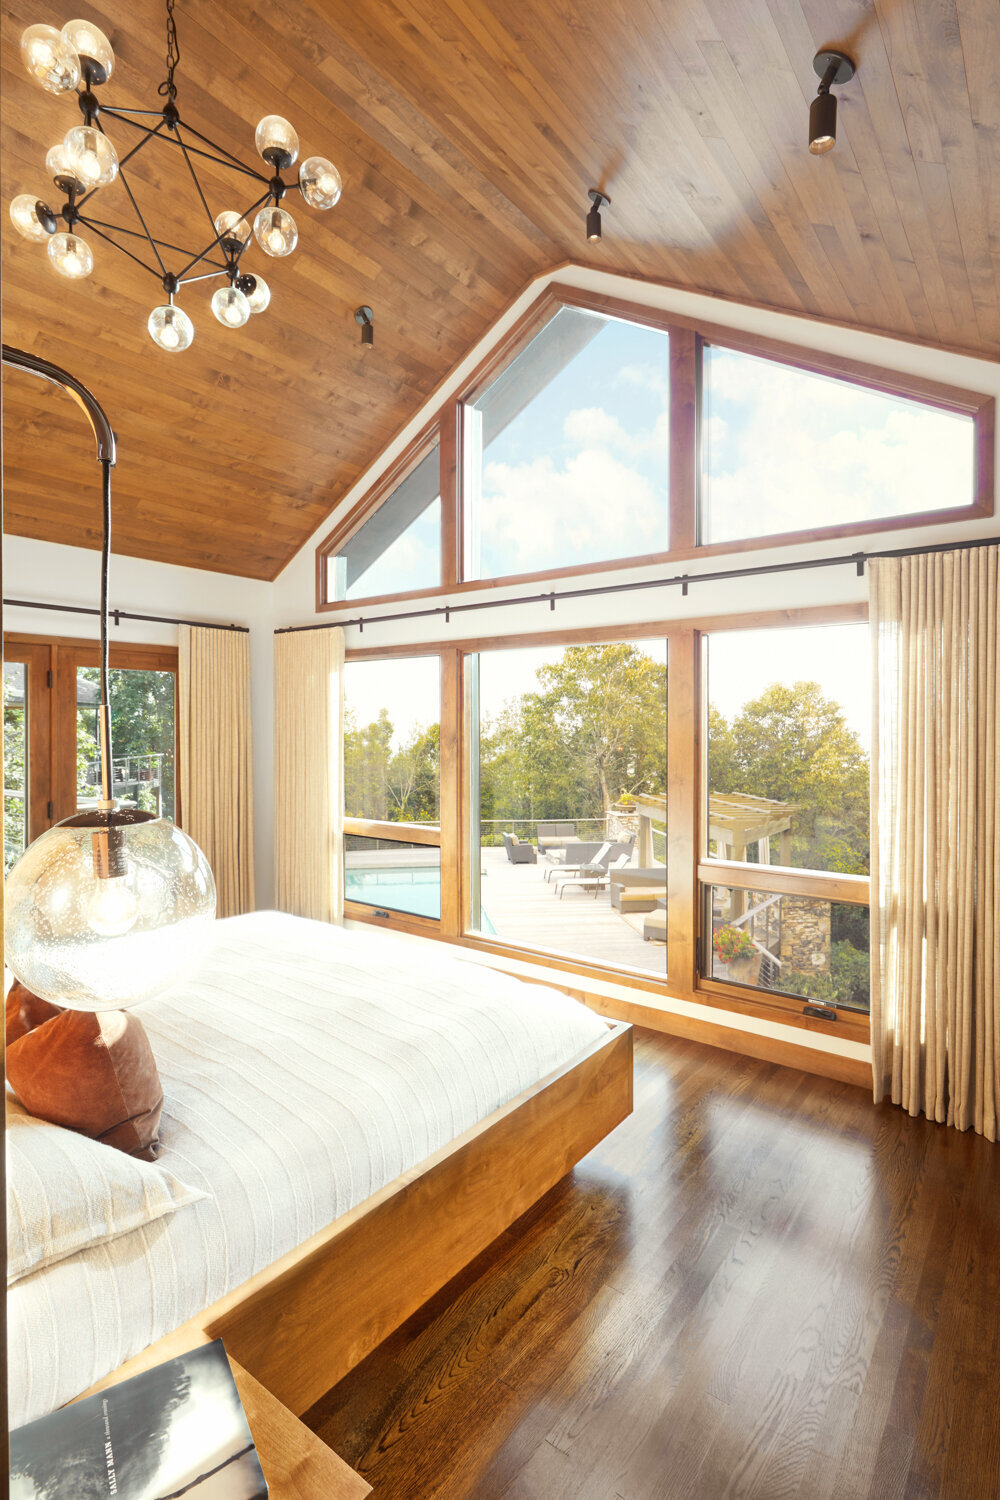 Panageries Residential Interior Design | Pacific NW Modern Dwelling Master Bedroom with Floor to Ceiling Windows